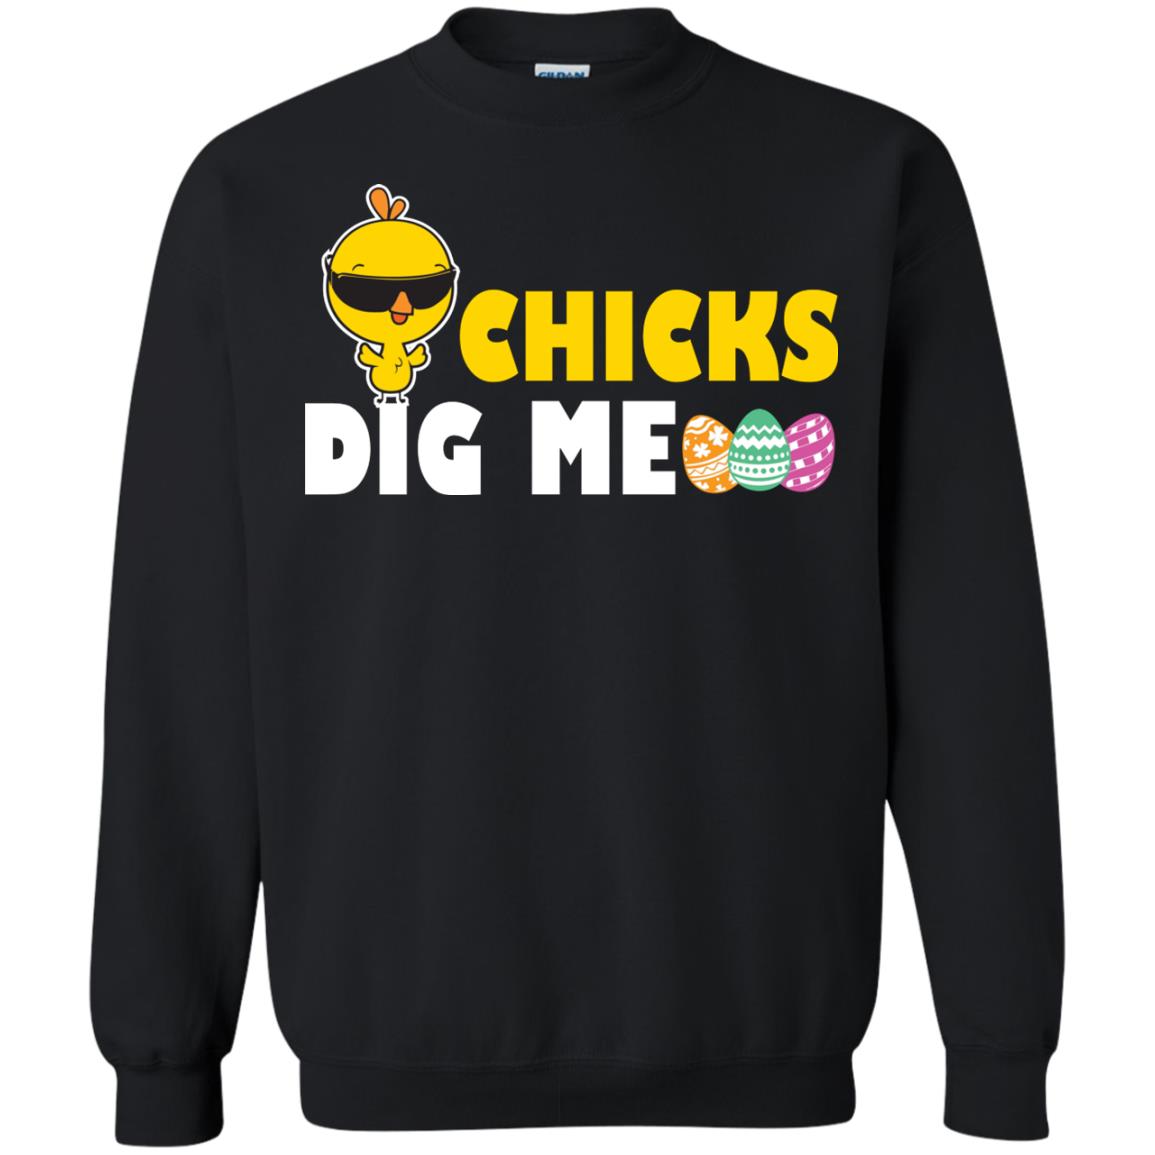 Chicks Dig Me Funny Chicken Shirt For Easter Day